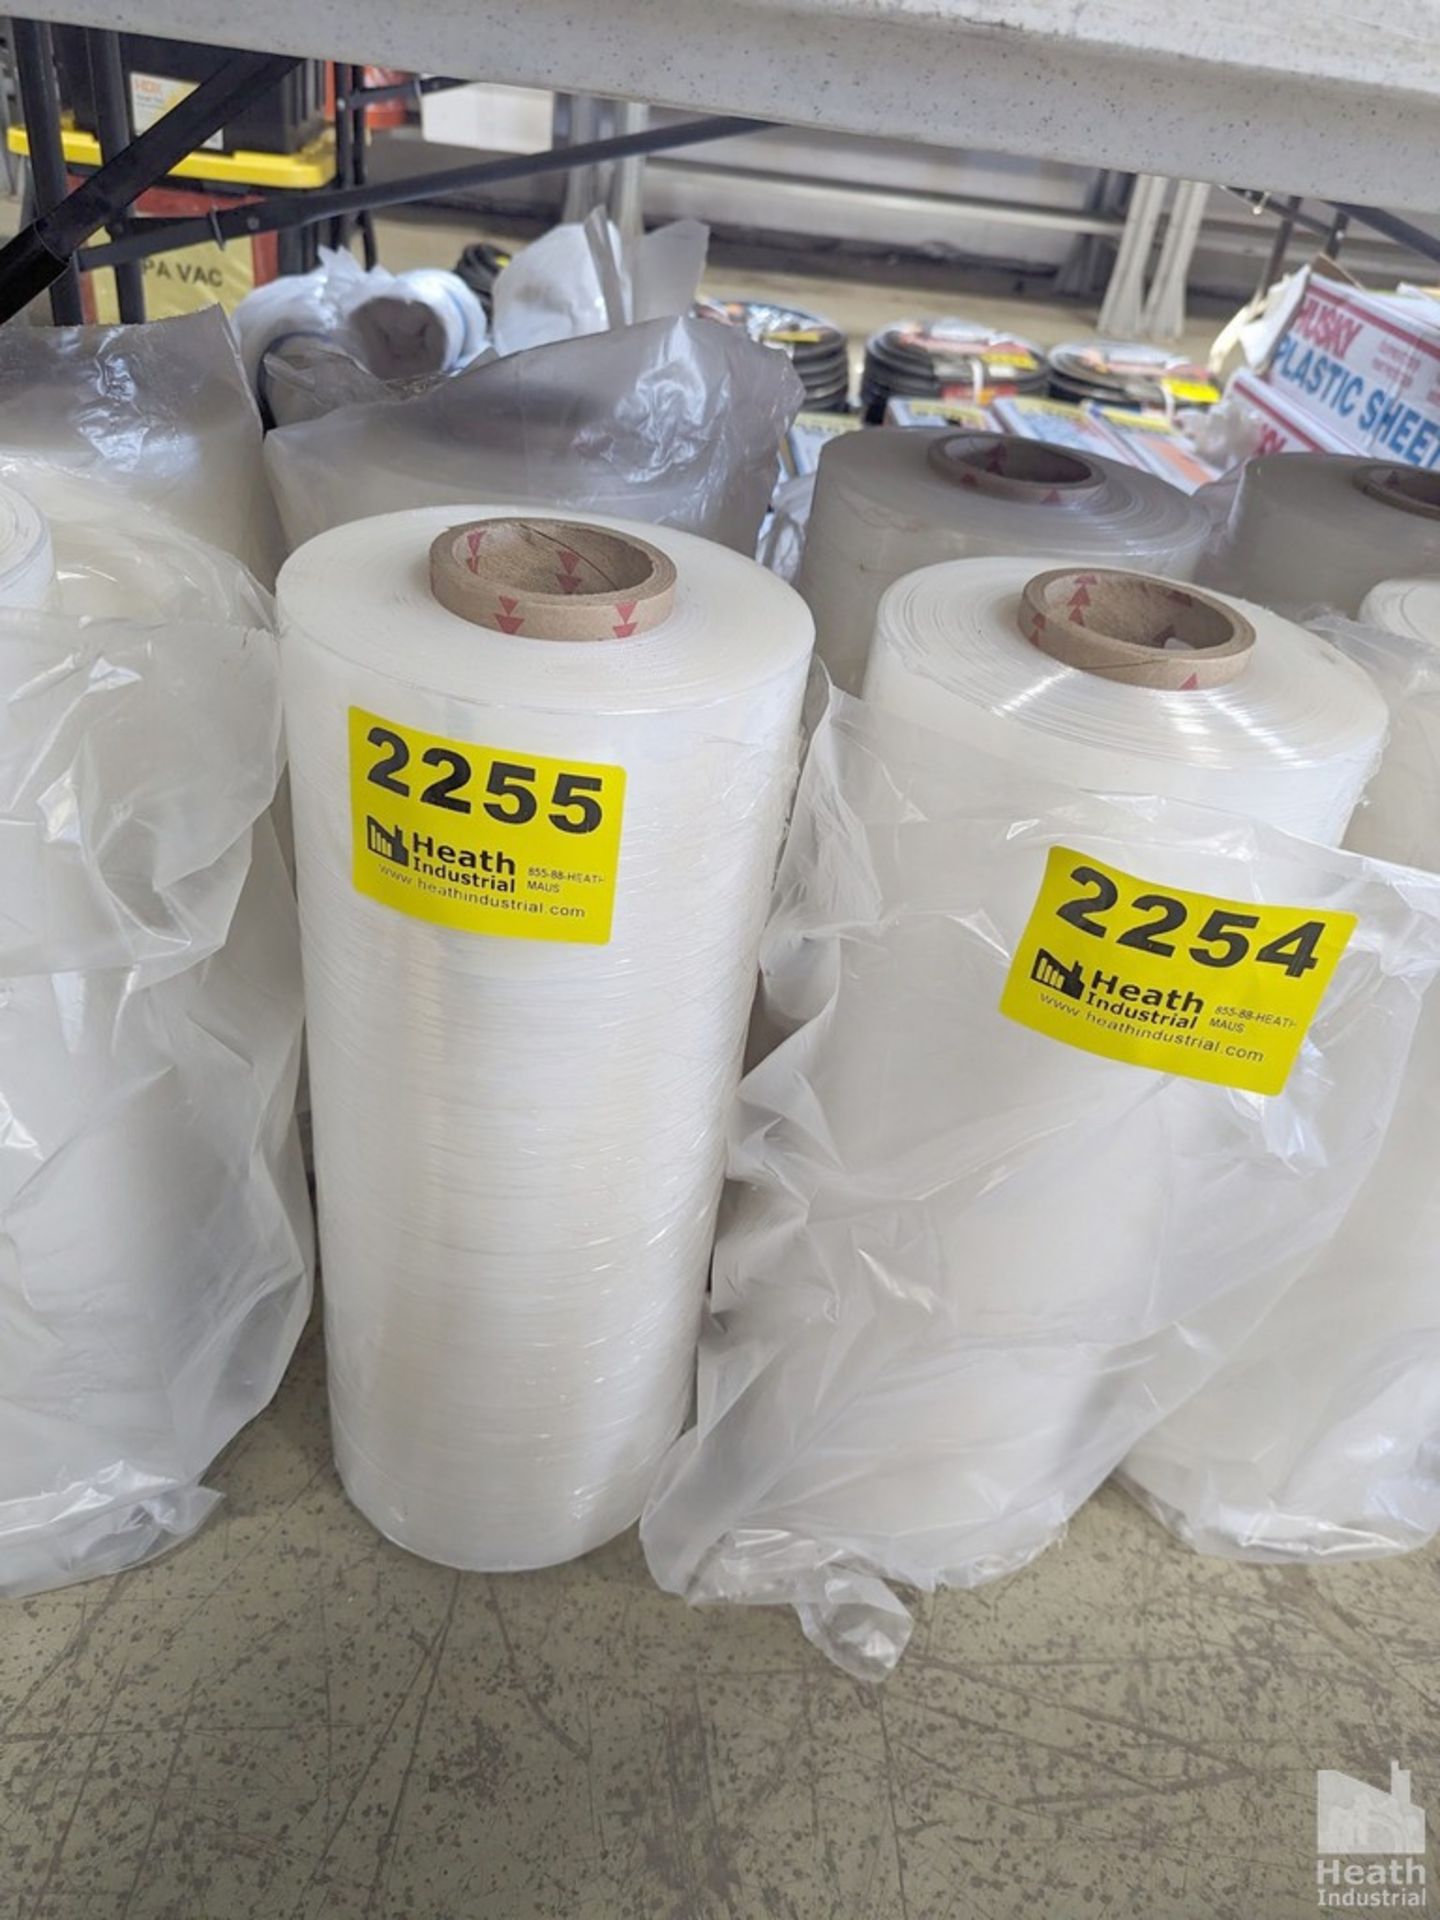 (2) LARGE ROLLS OF STRETCH WRAP MATERIAL